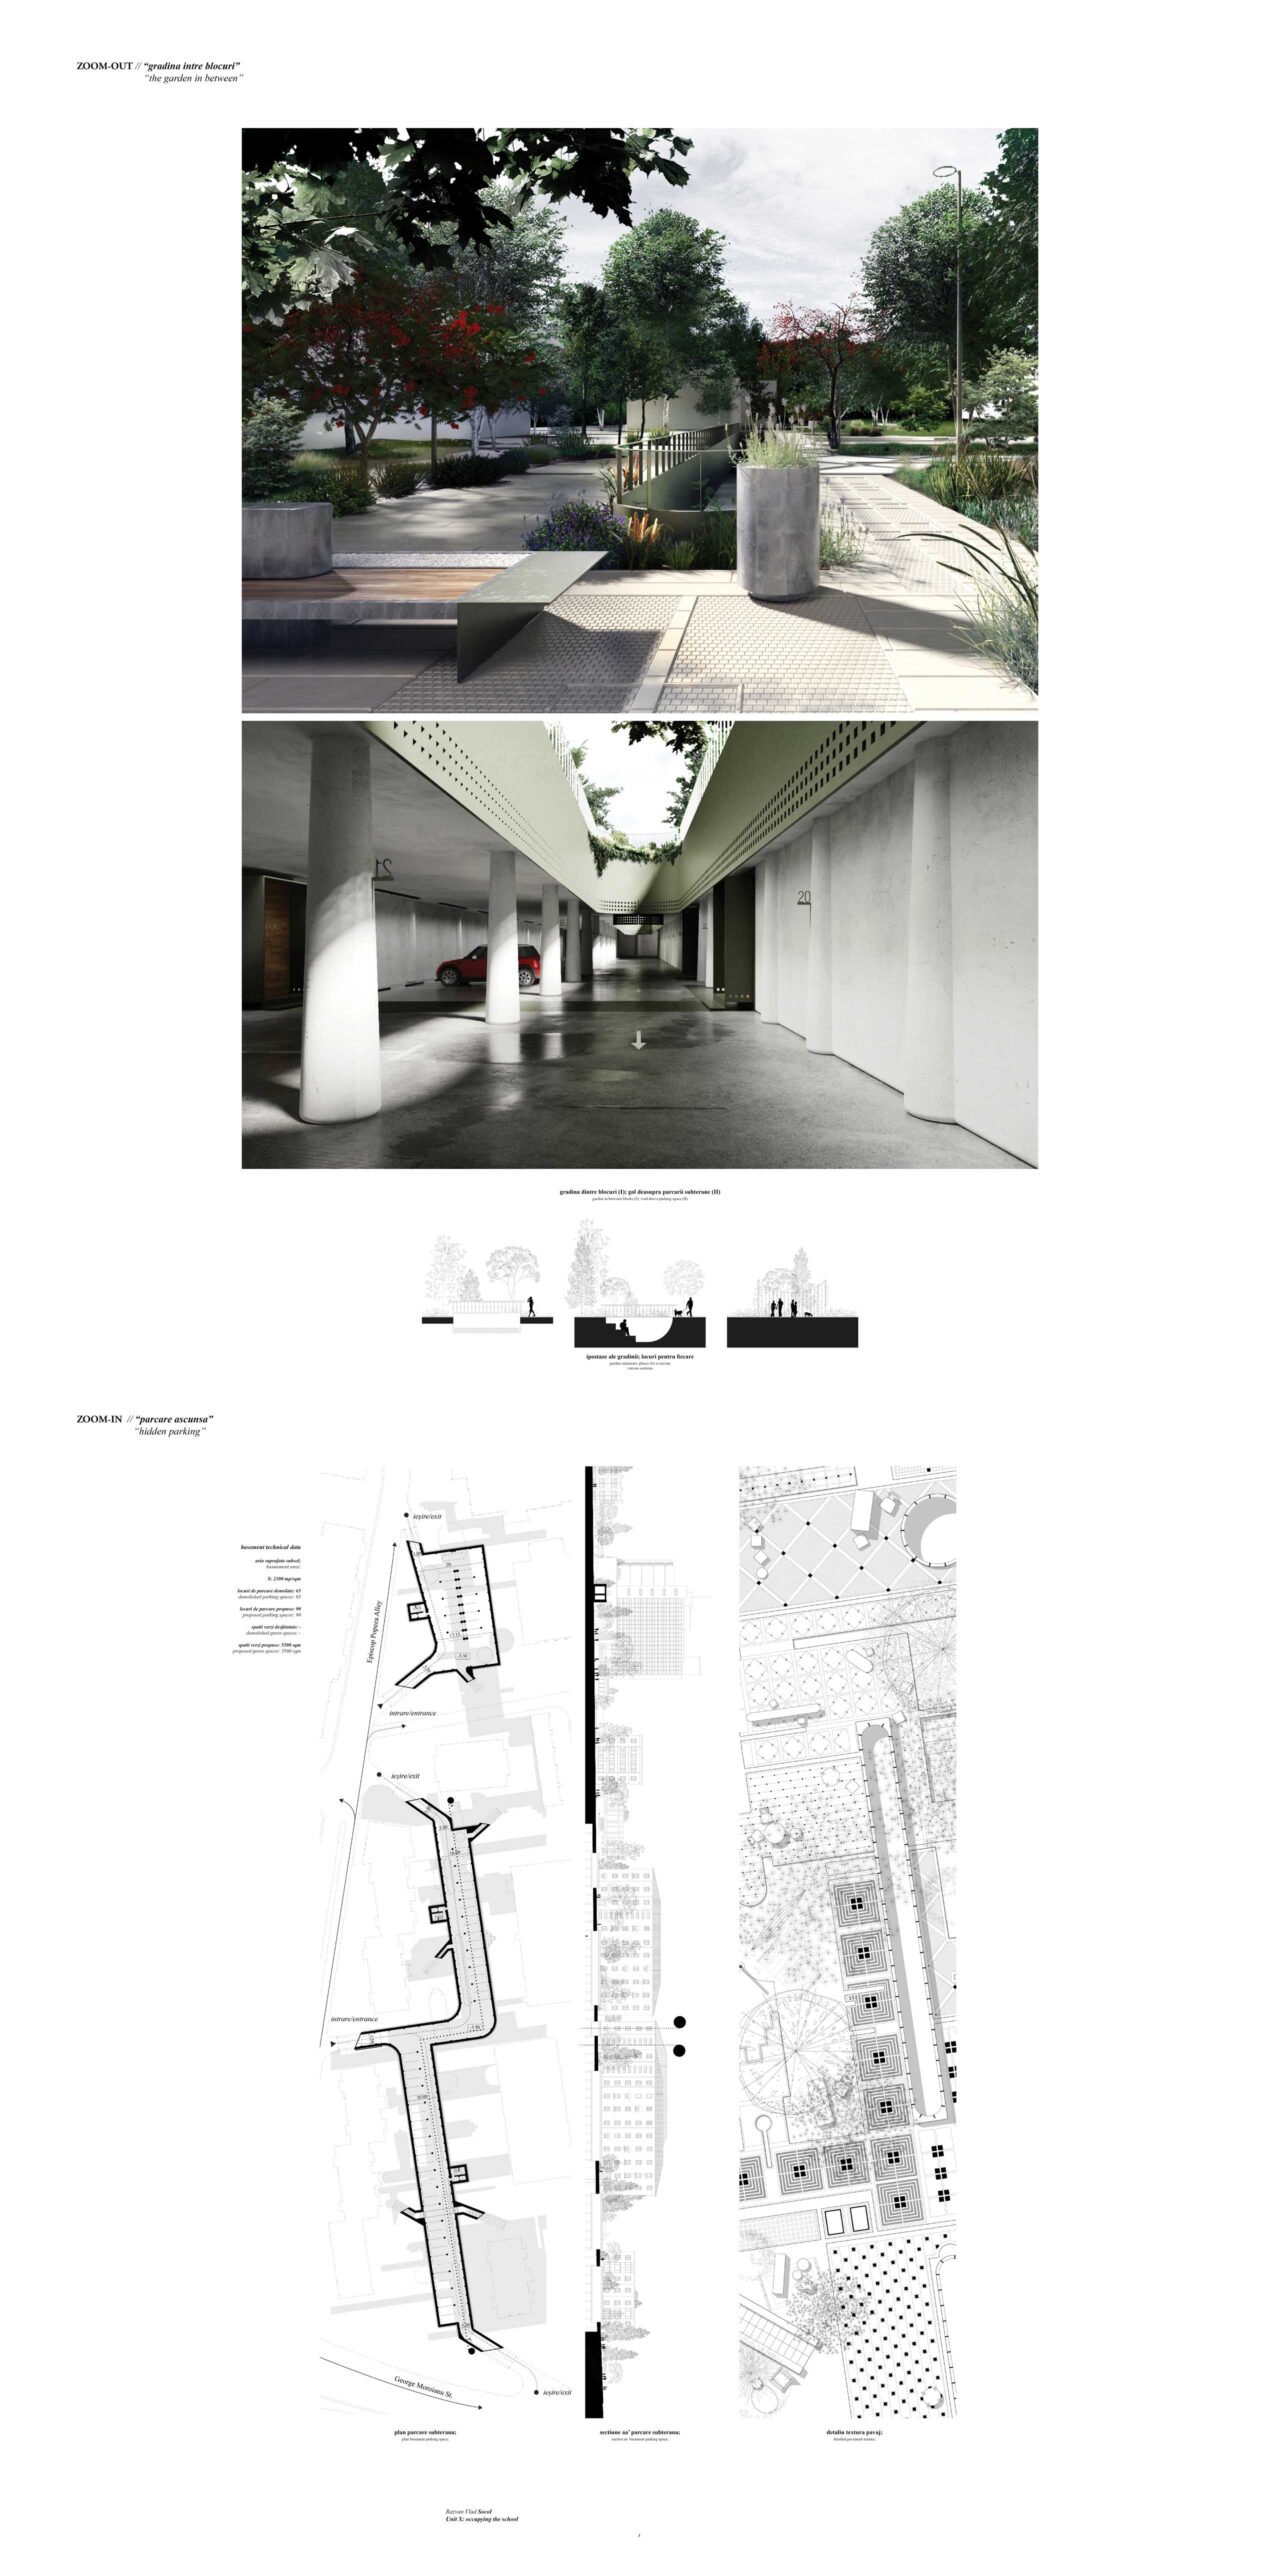 The public space and the underground parking lots, rendering and architectural plans.